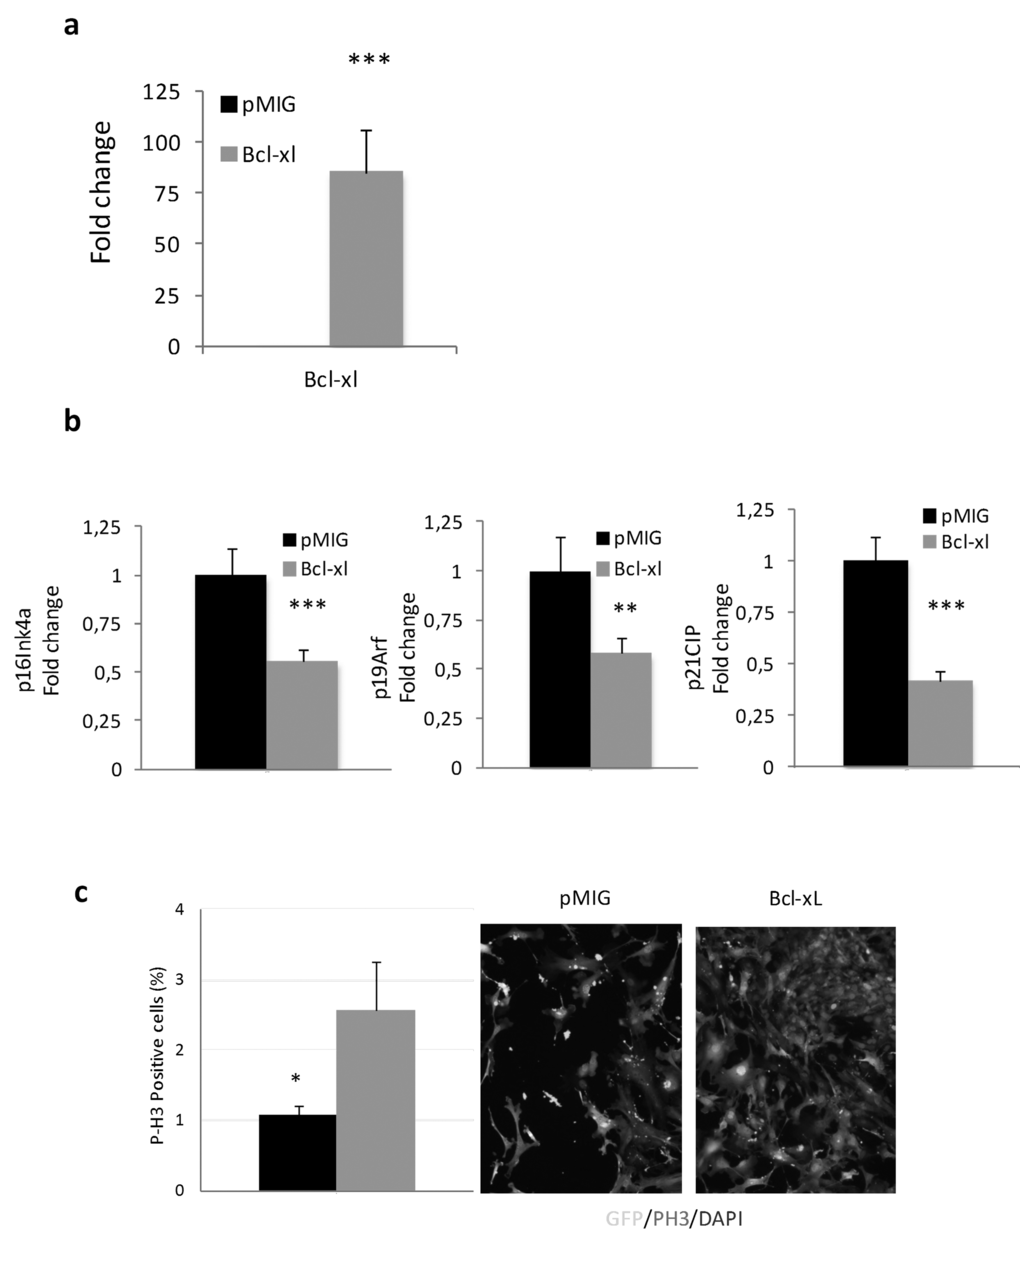 Bcl-xL, decreases senescence, enhances proliferation and protects against oxidative damage in mouse embryo fibroblasts (MEFs) in primary culture. (a) Bcl-xLover-expression in MEFs. (b) Bcl-xLdown-regulates expression of age-associated cell cycle inhibitors: RT-PCR mRNA expression analysis of p16Ink4a, p19Arf, and p21CIP in MEFs retrovirally transduced withBcl-xLorpMIG (controls) (n=7 in each group). (c) Bcl-xL over-expression increase proliferation in MEFs (determined as P-H3 positive cells) 